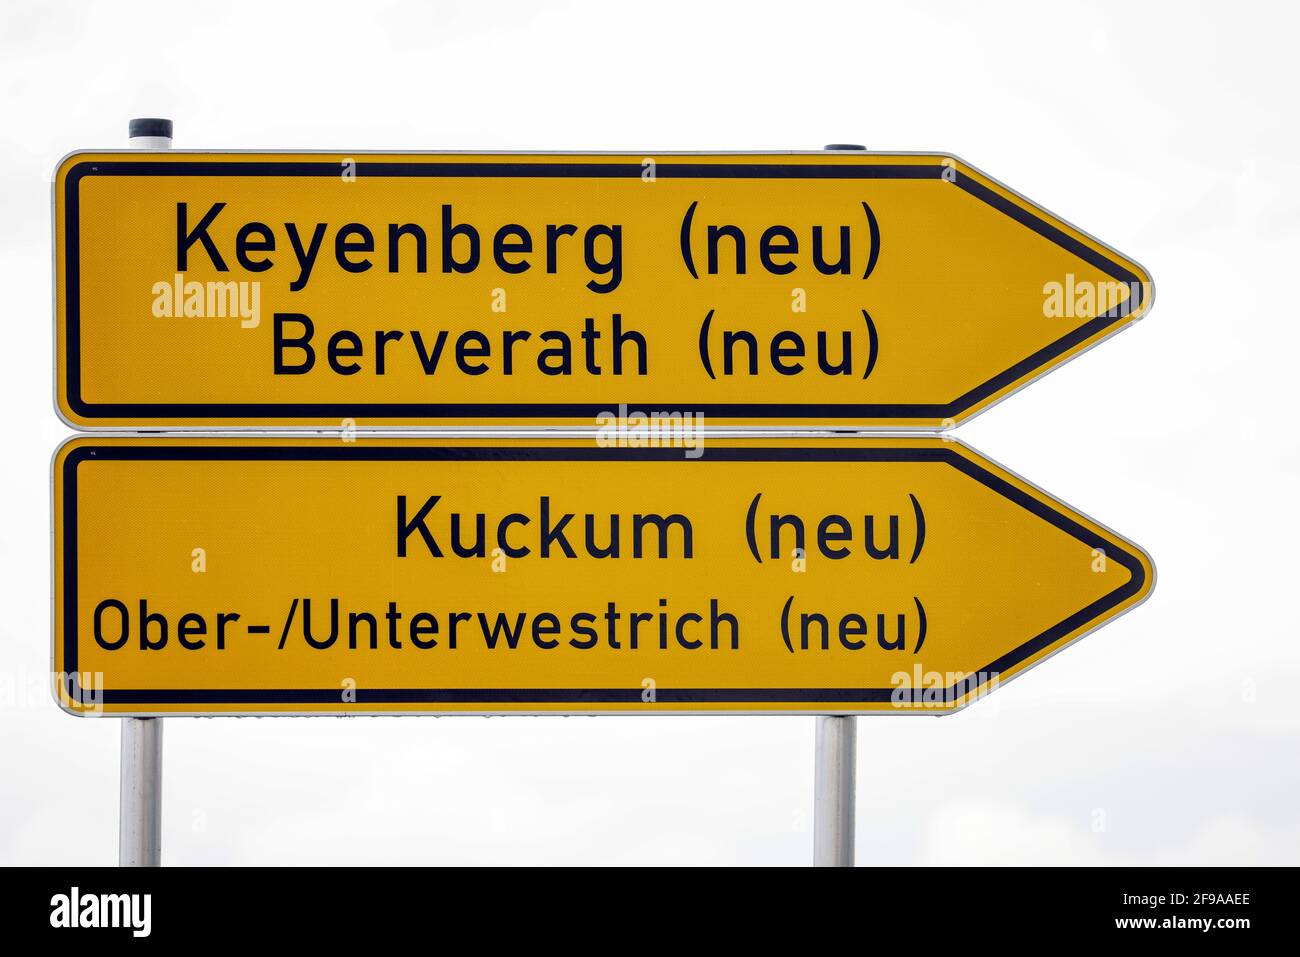 Erkelenz, North Rhine-Westphalia, Germany - Street sign to the relocation site for Keyenberg, Kuckum, Unterwestrich, Oberwestrich and Berverath, the places had to give way to the RWE open-cast lignite mine in Garzweiler, RWE Power is developing the new residential area together with the city of Erkelenz. Stock Photo